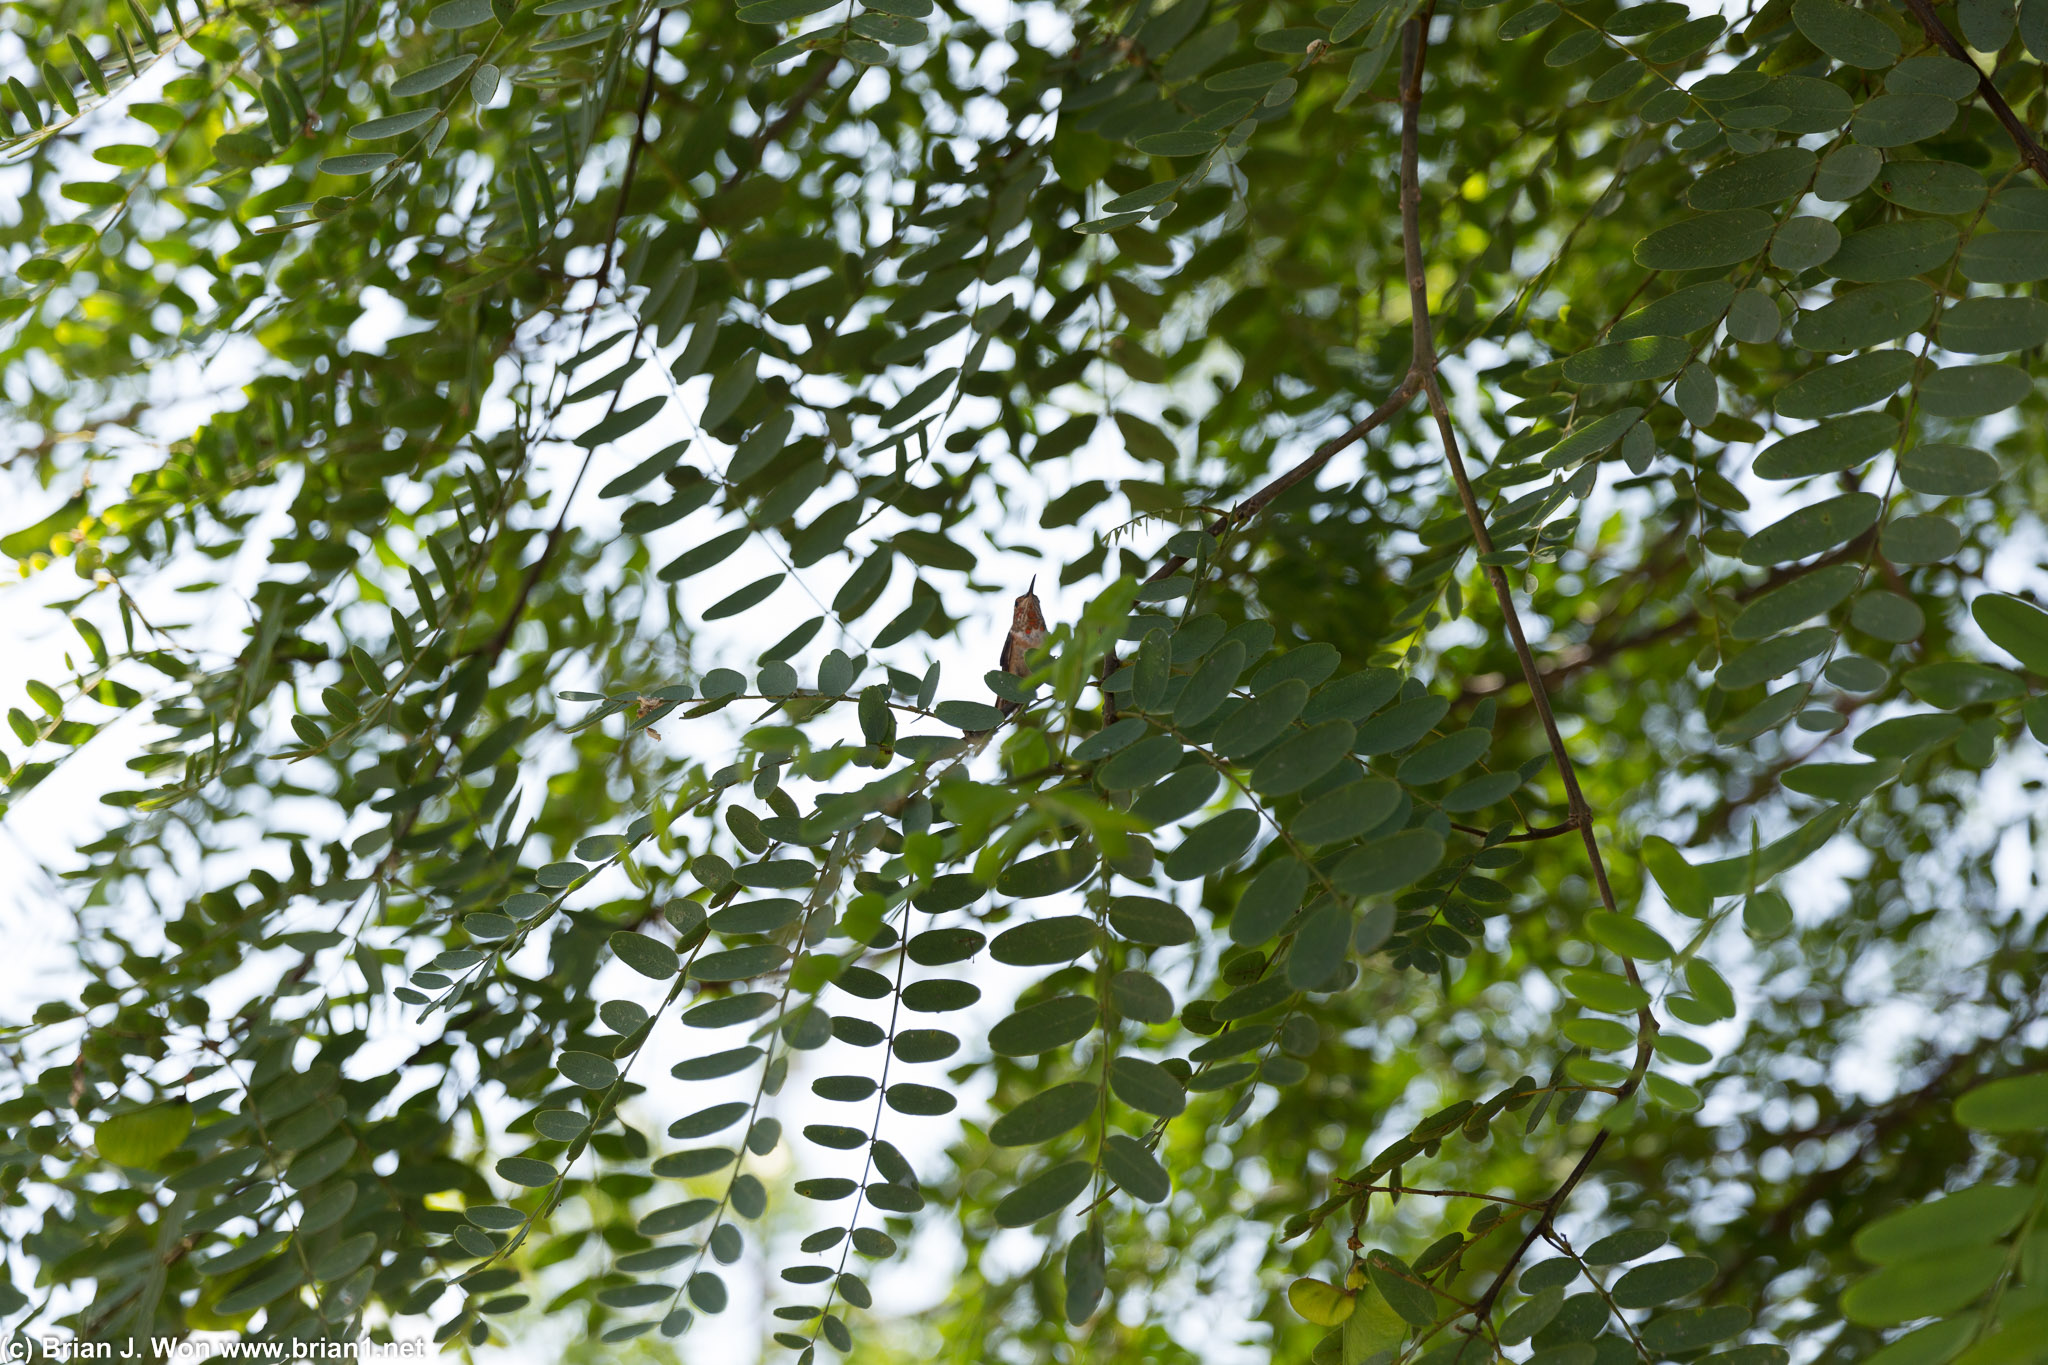 Hummingbird in the backyard watching the party.